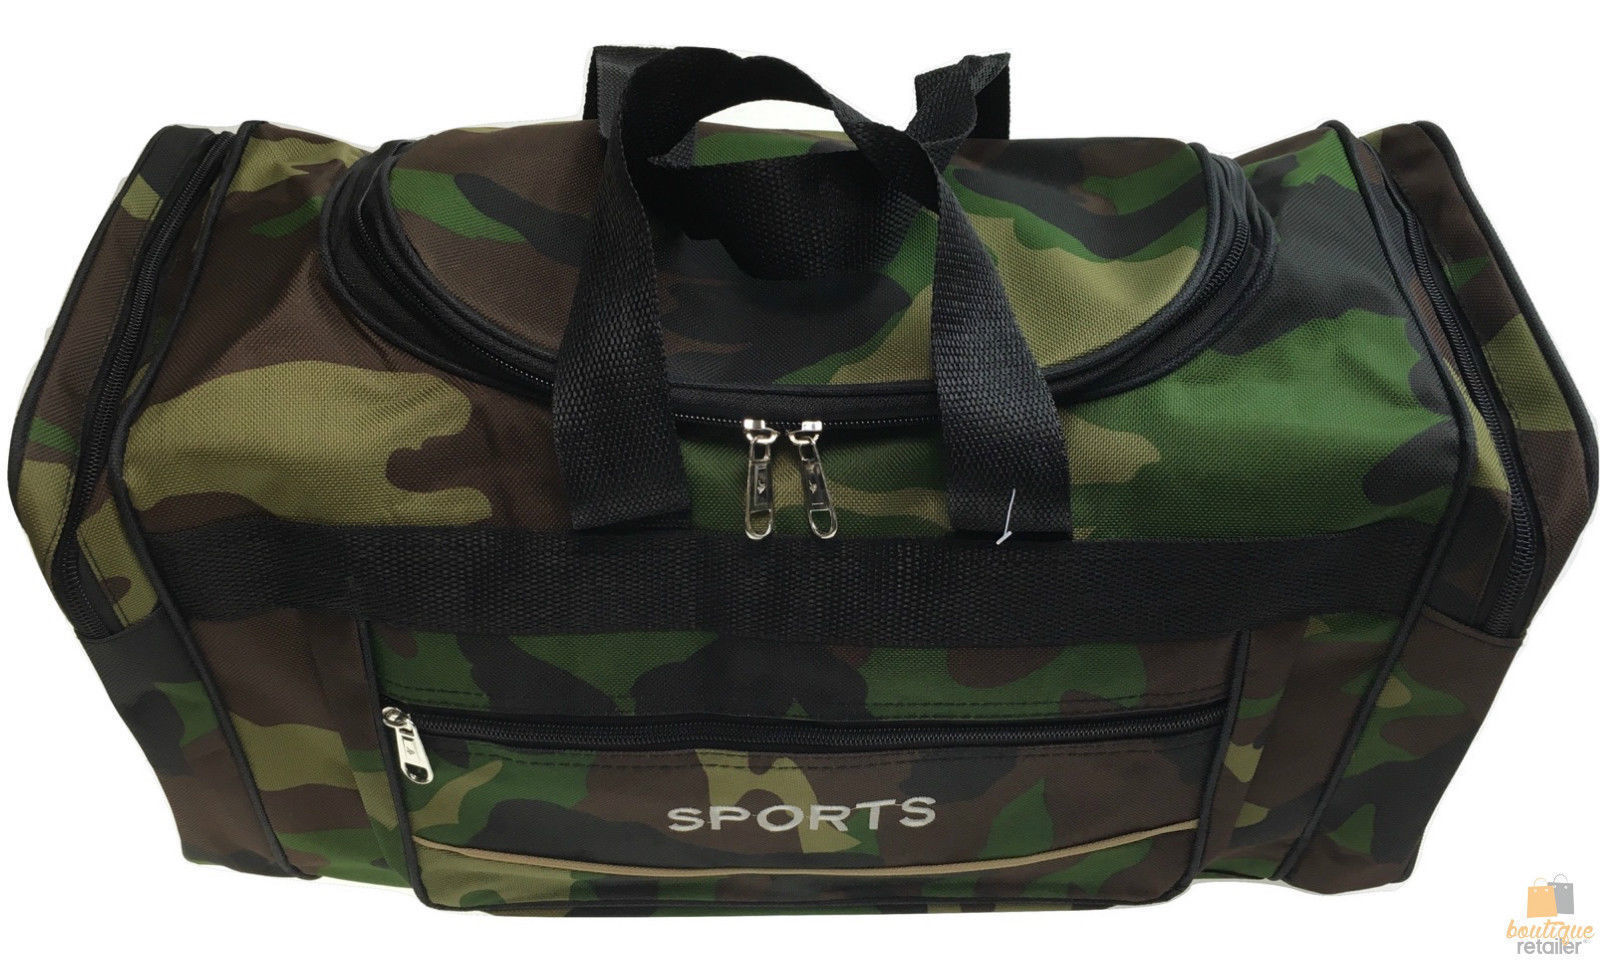 CAMO SPORTS BAG Gym Duffle Travel Water Resistant with Shoulder Strap Camouflage | eBay